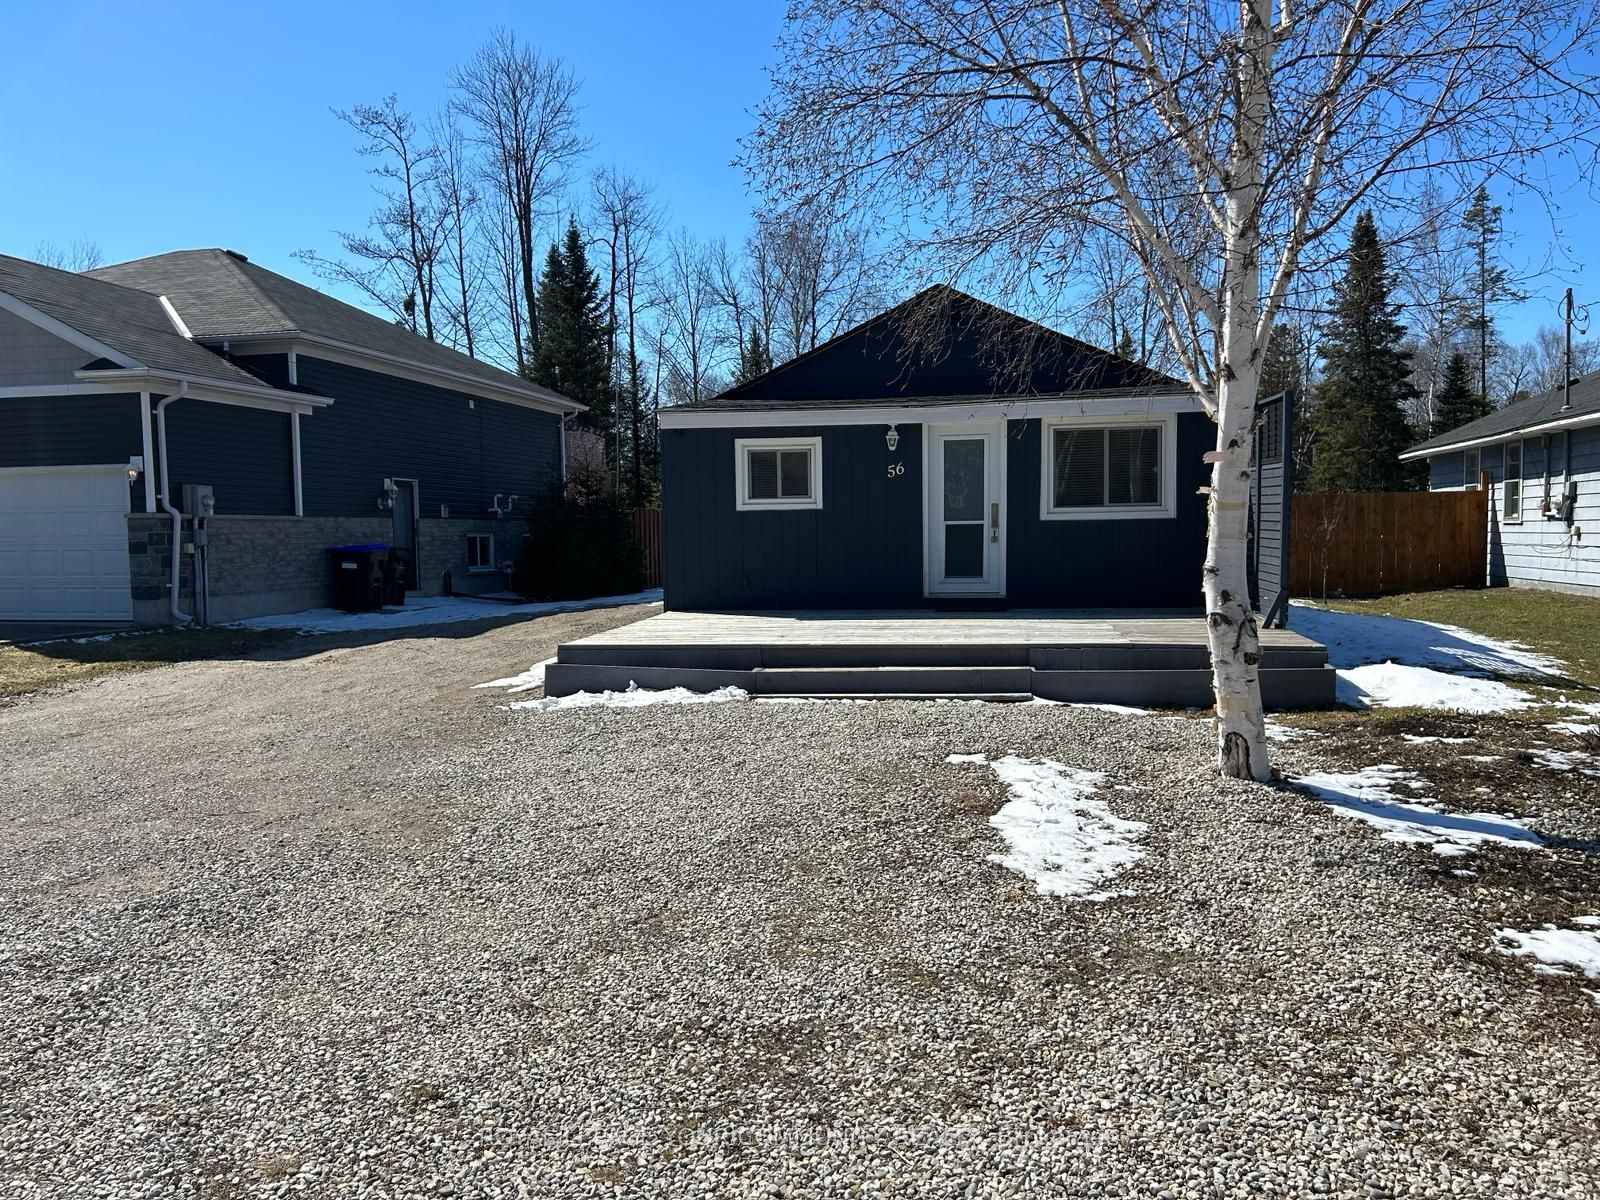 Detached house for sale at 56 60th St S Wasaga Beach Ontario